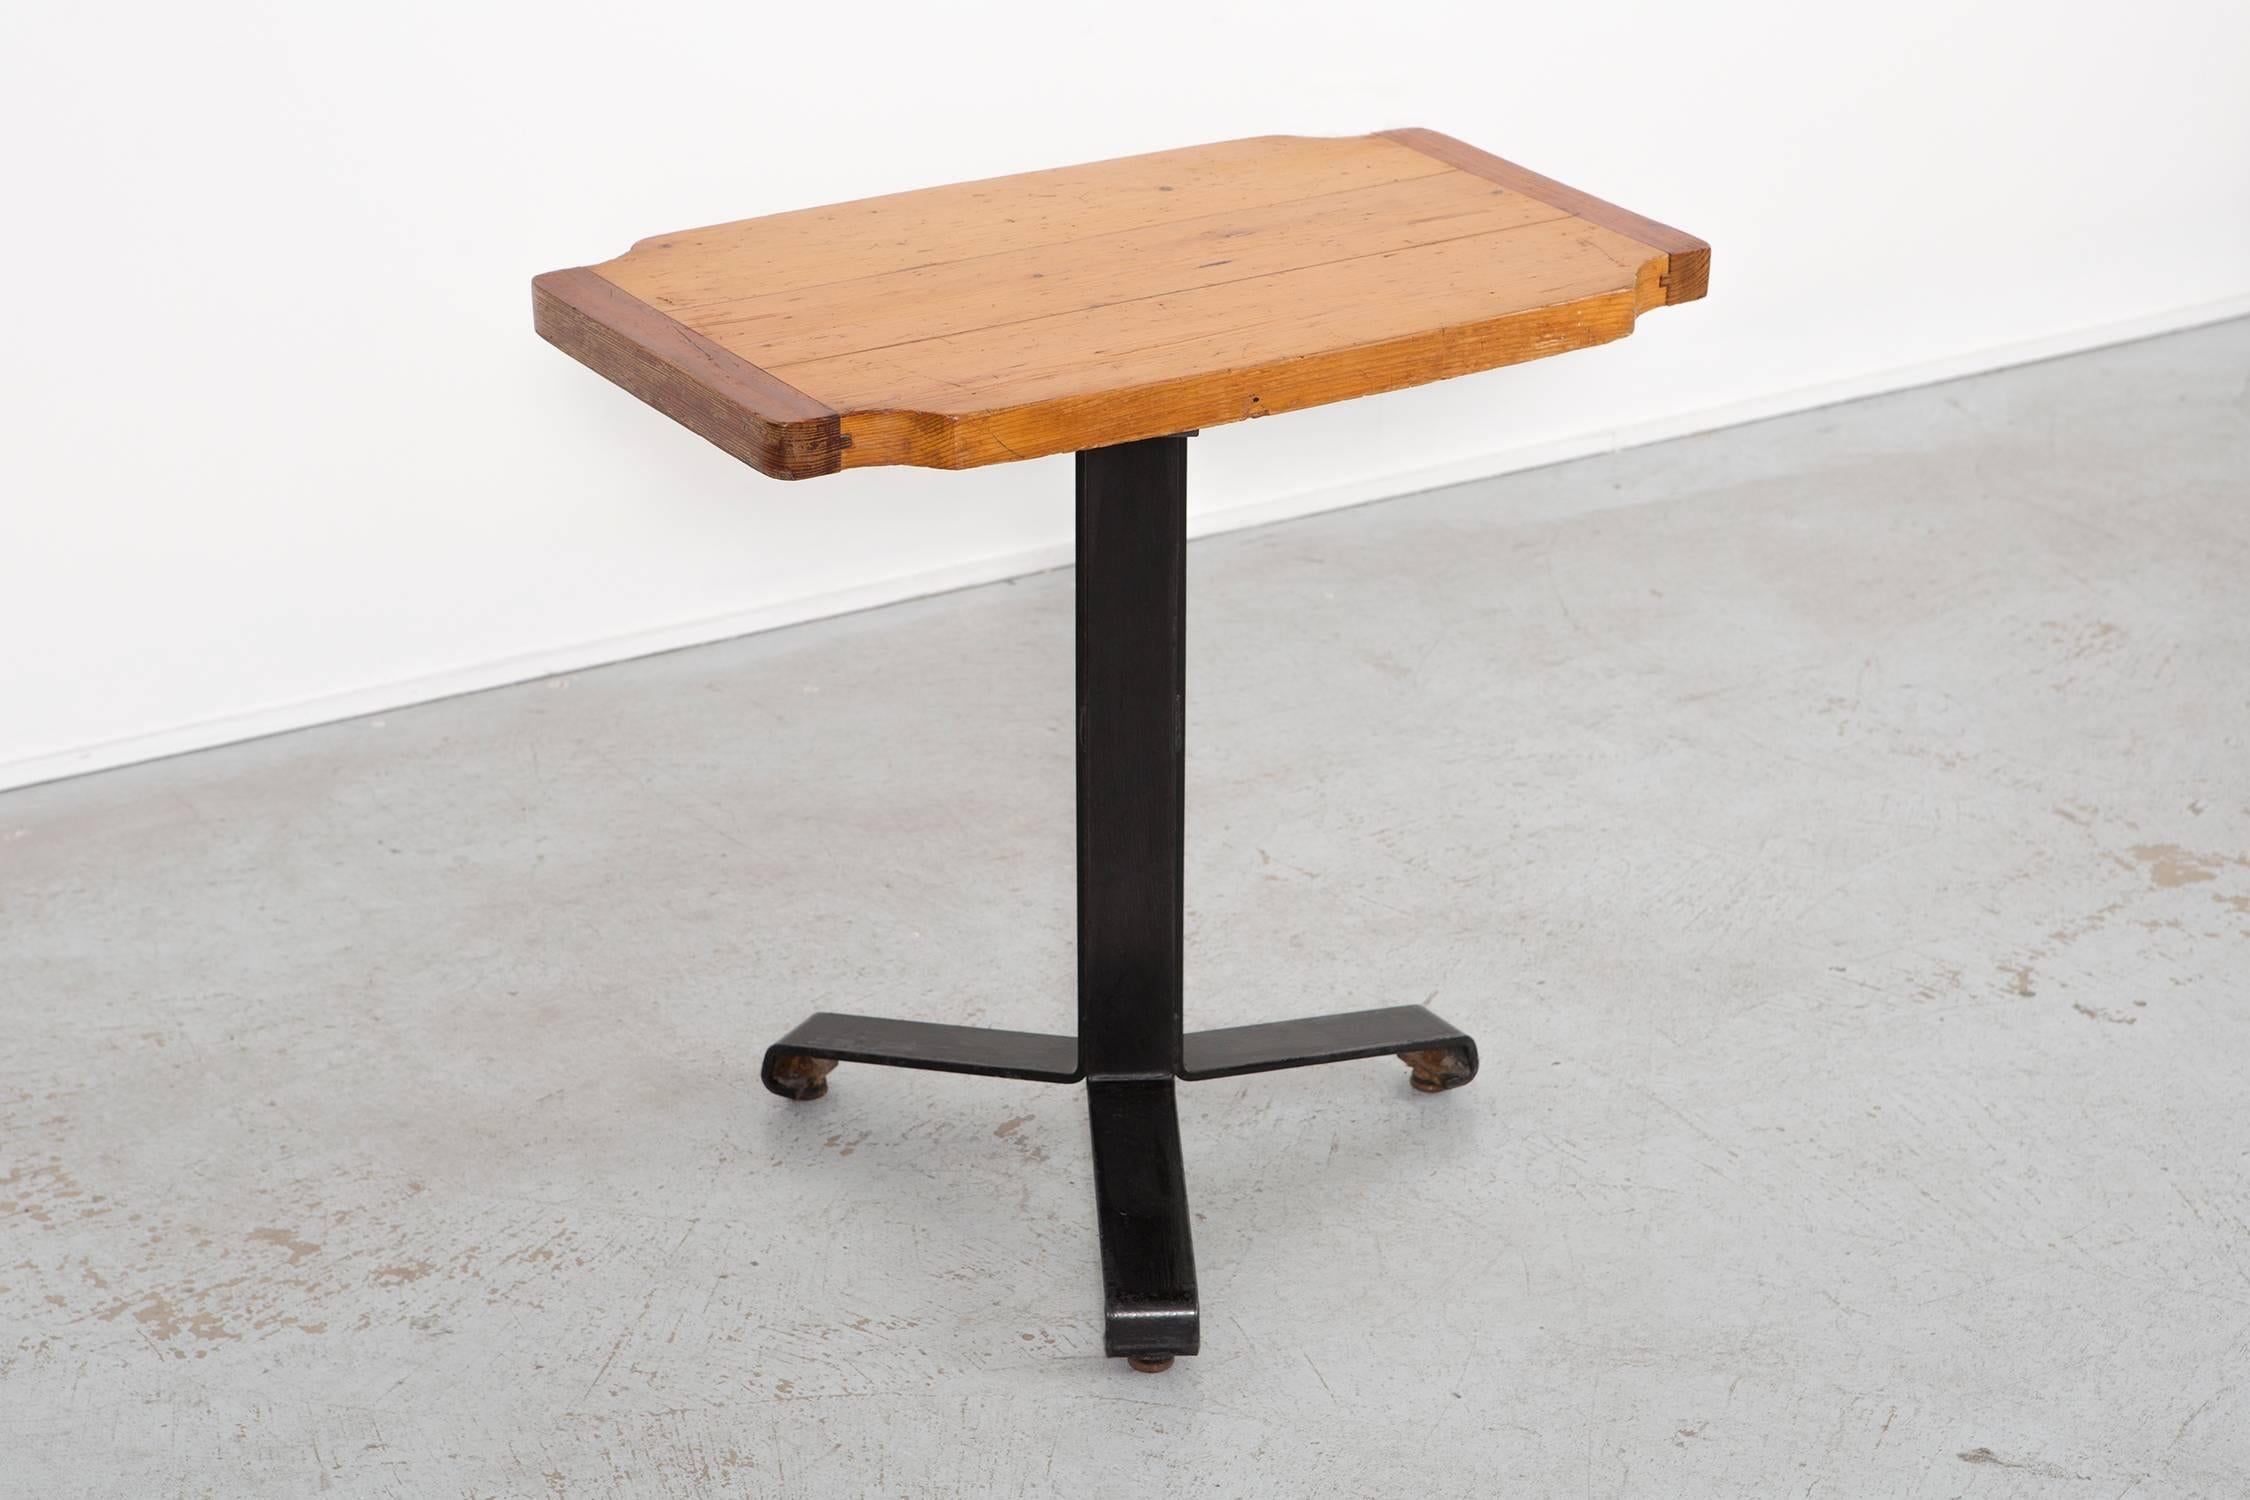 Occasional - cafe table

designed by Charlotte Perriand for Les Arcs

France, circa 1960s 

wood + metal

Measures: 25 15/16” H x 27 7/16” W x 16 5/8” D.